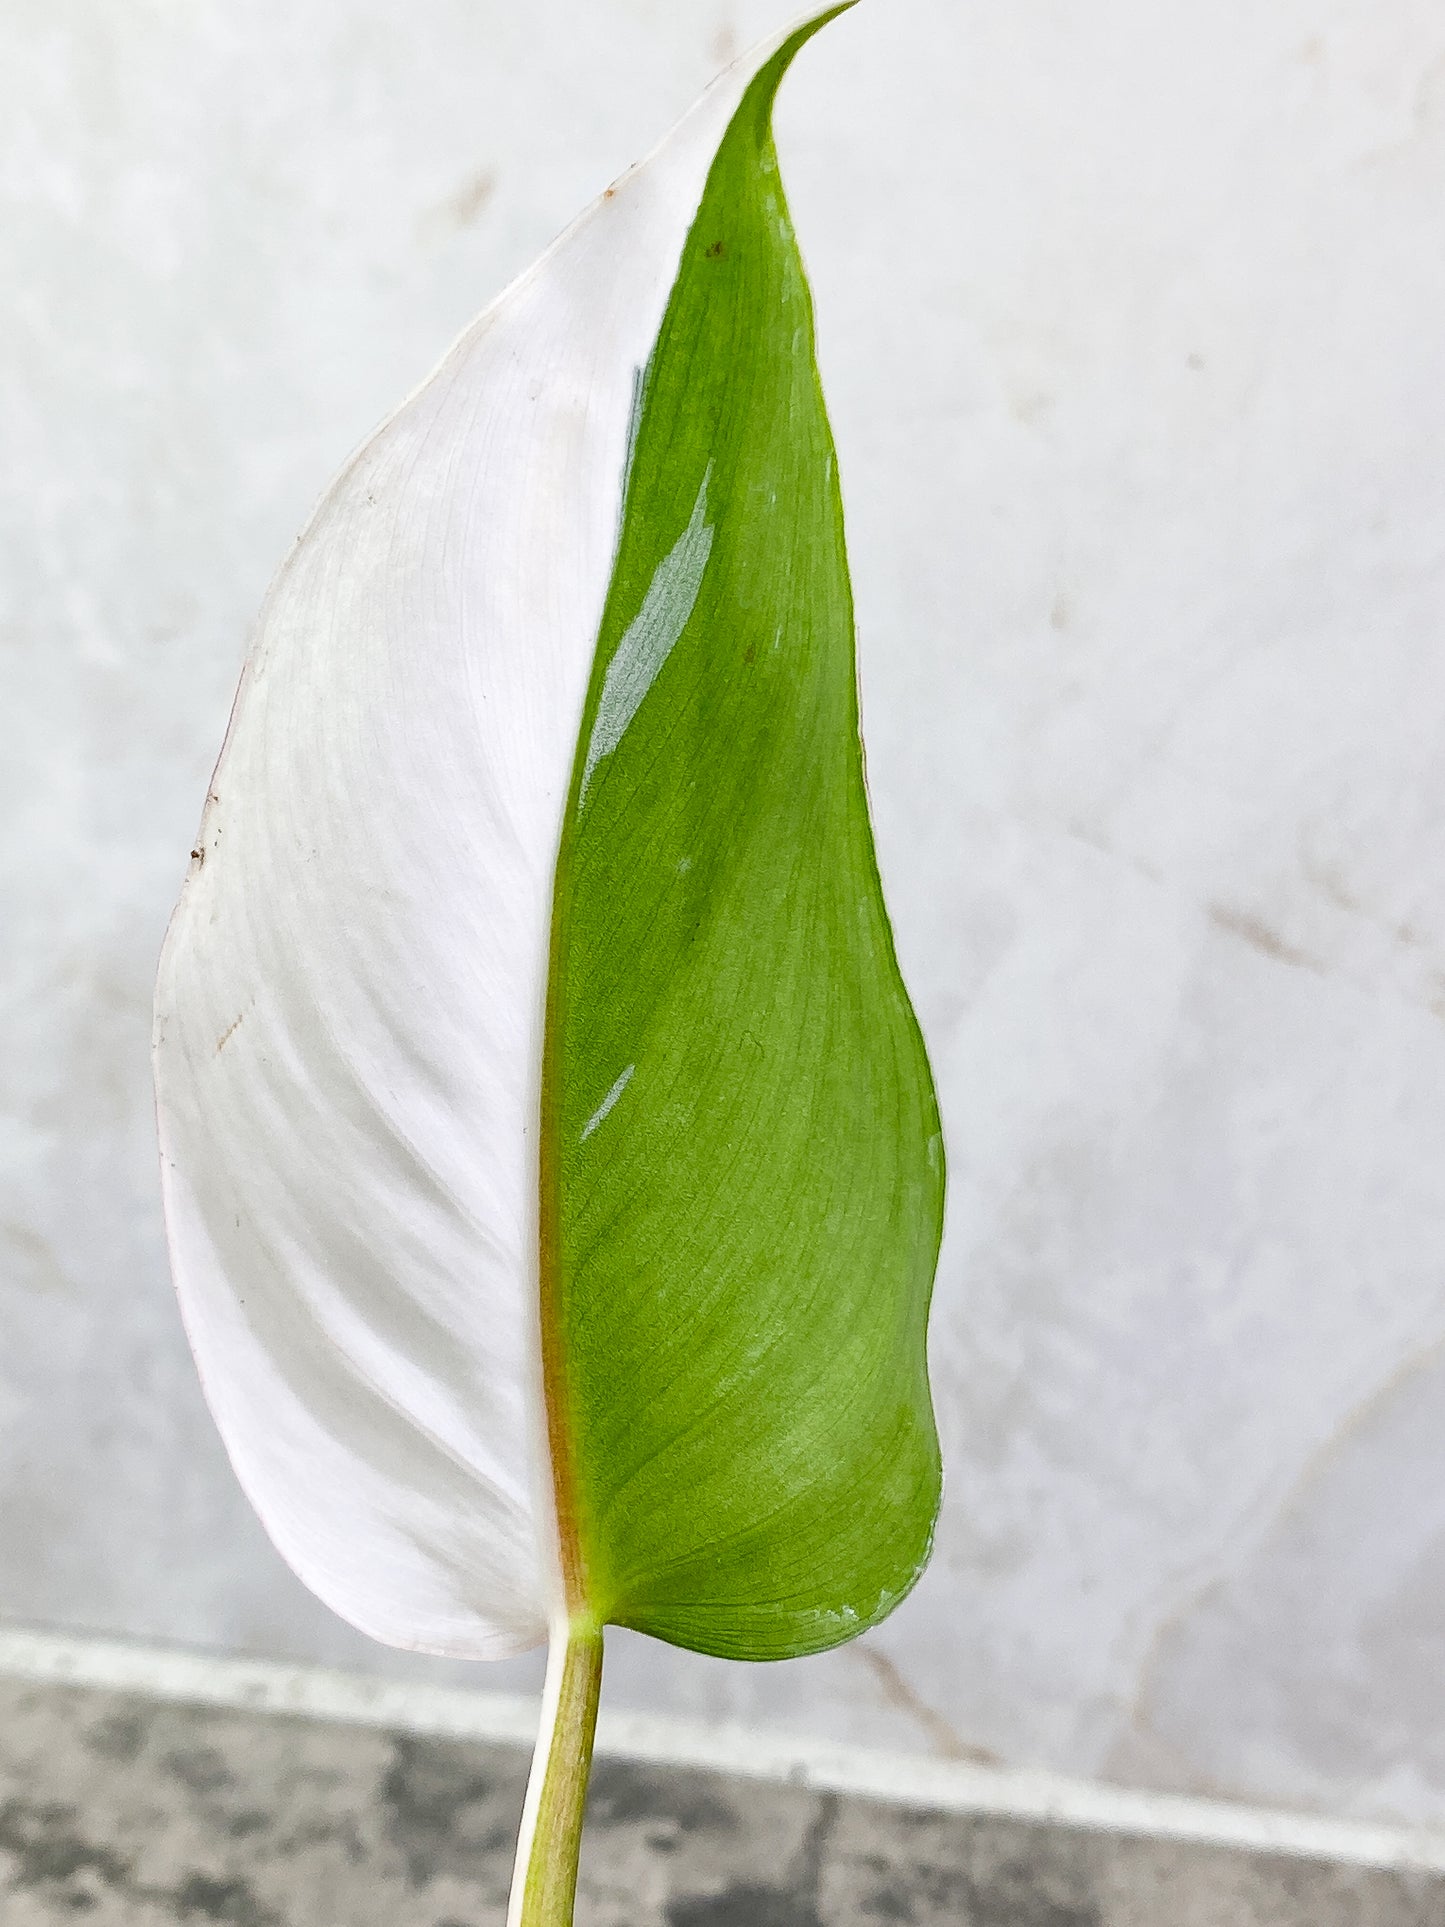 Philodendron White Princess 1 leaf Rooted Half Moon